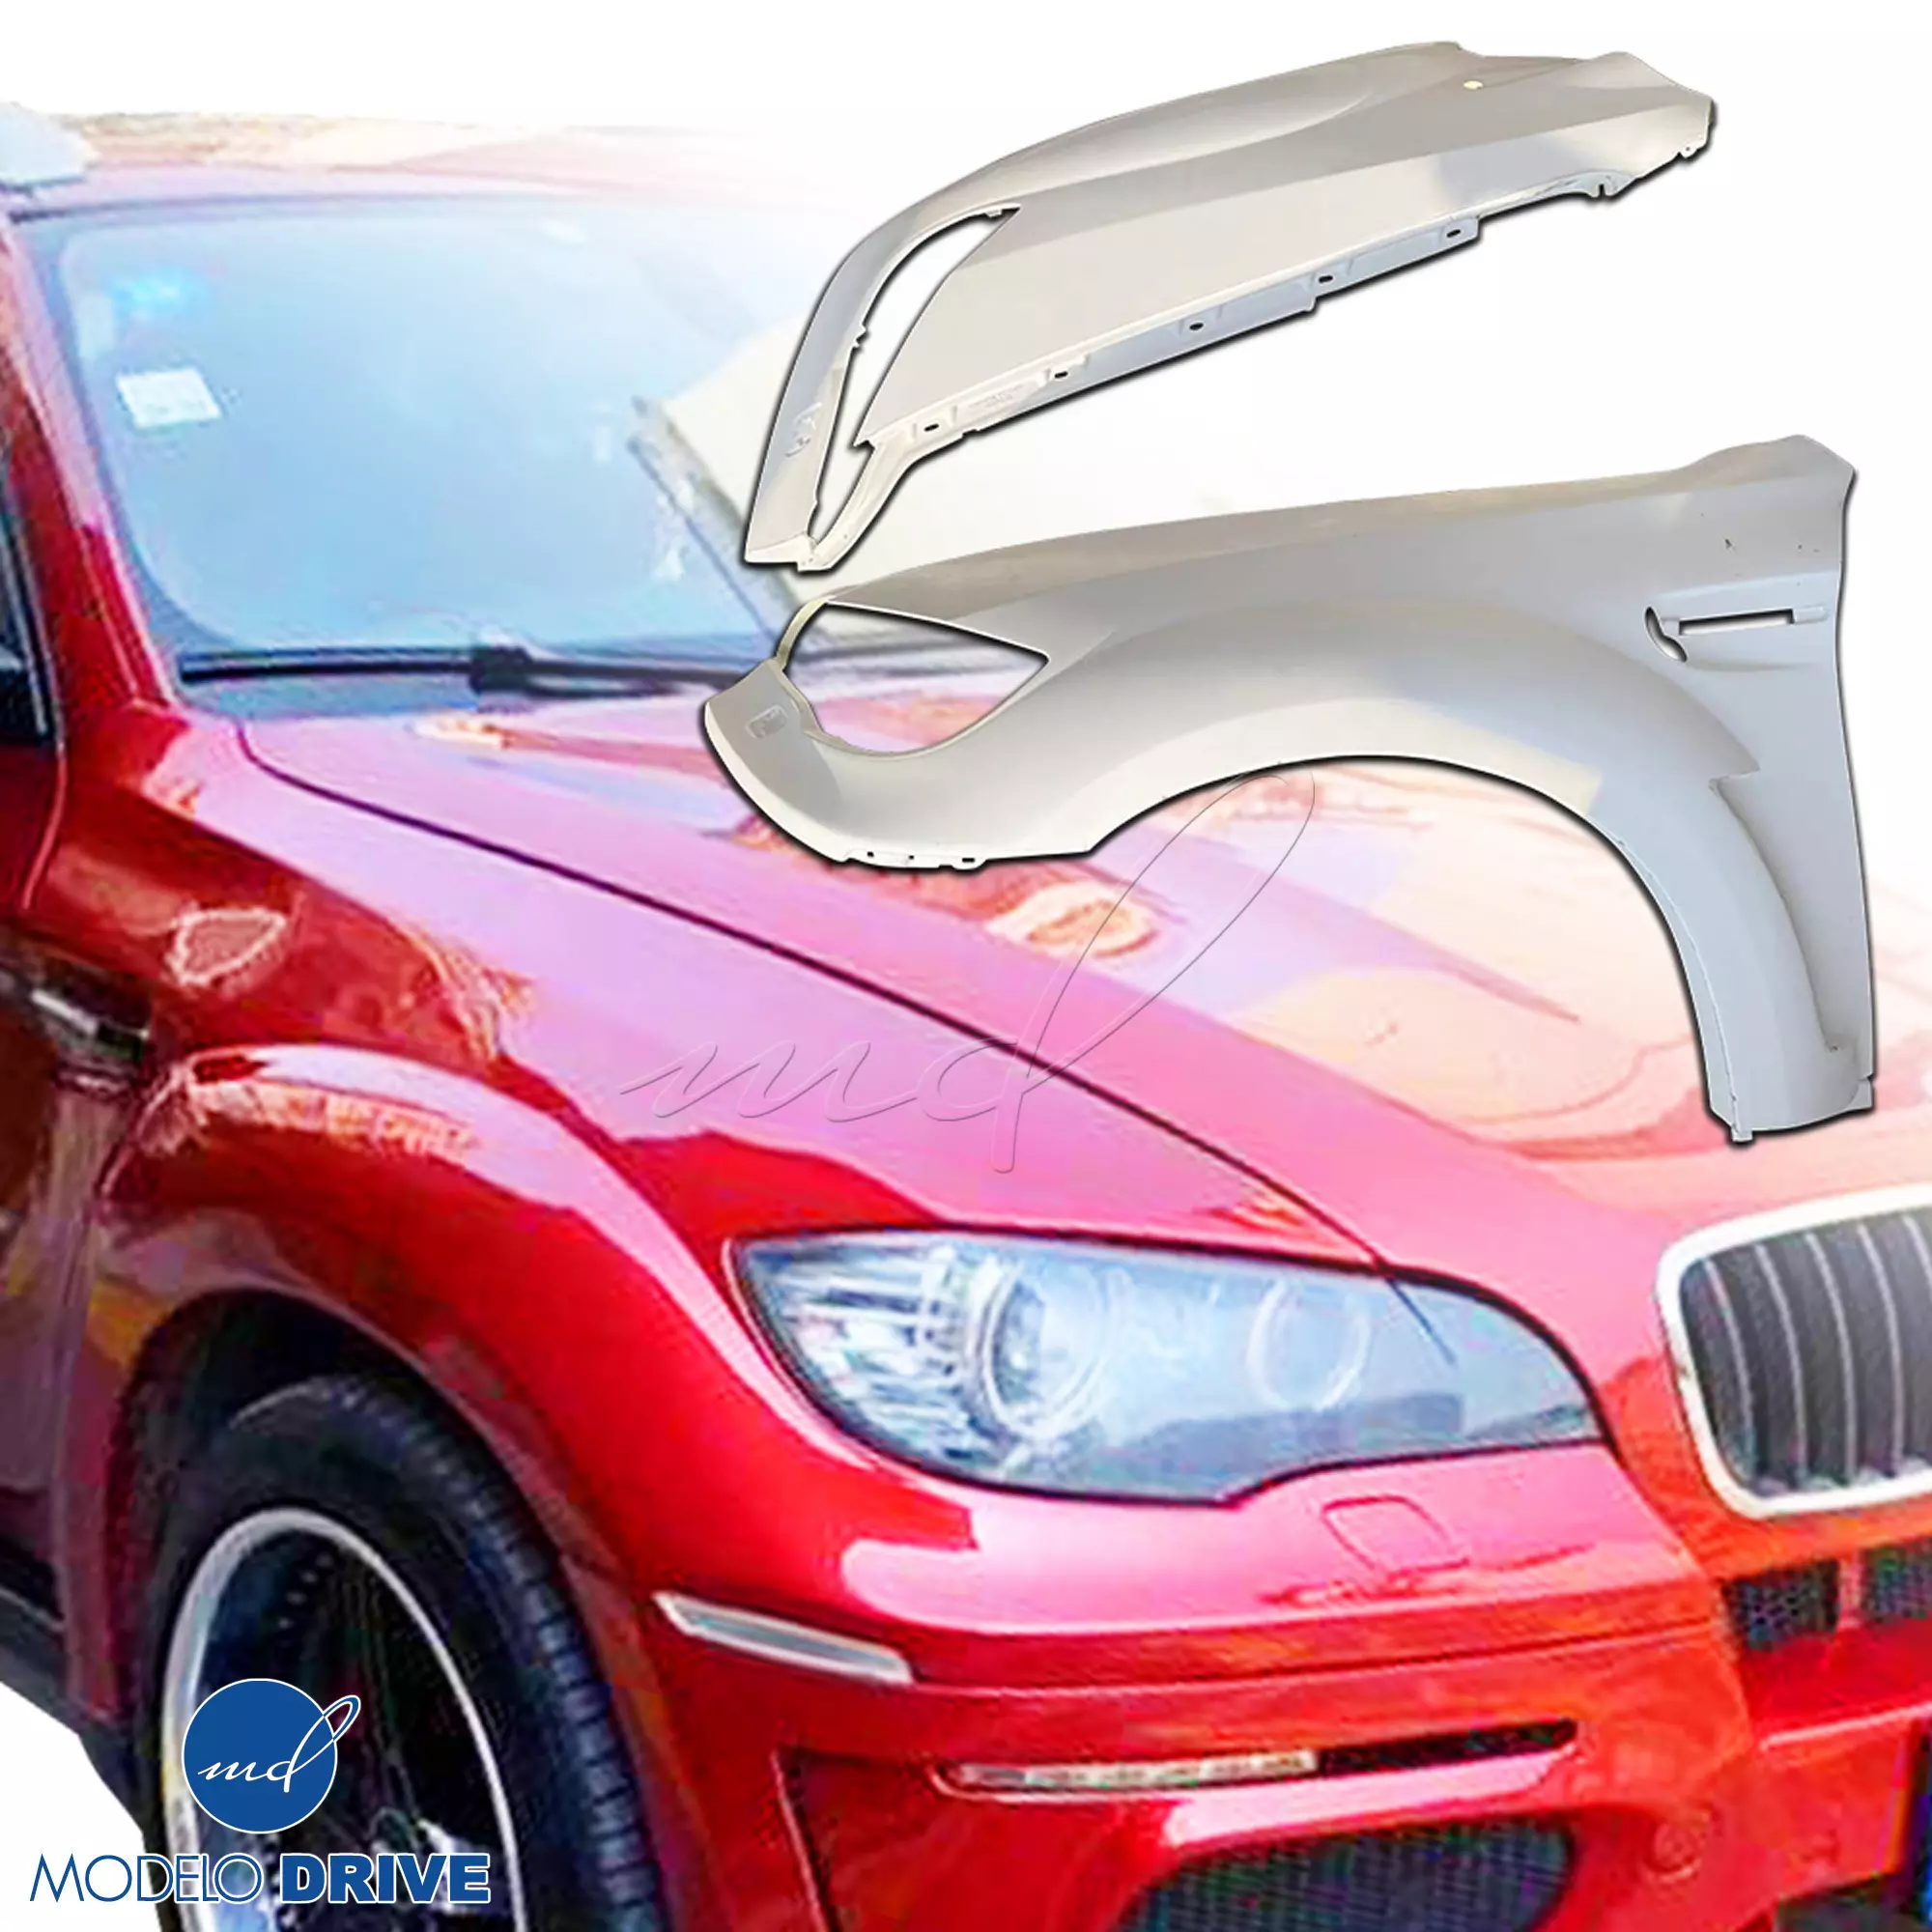 ModeloDrive FRP HAMA Wide Body Fenders (front) 2pc > BMW X6 E71 2008-2014 - Image 11